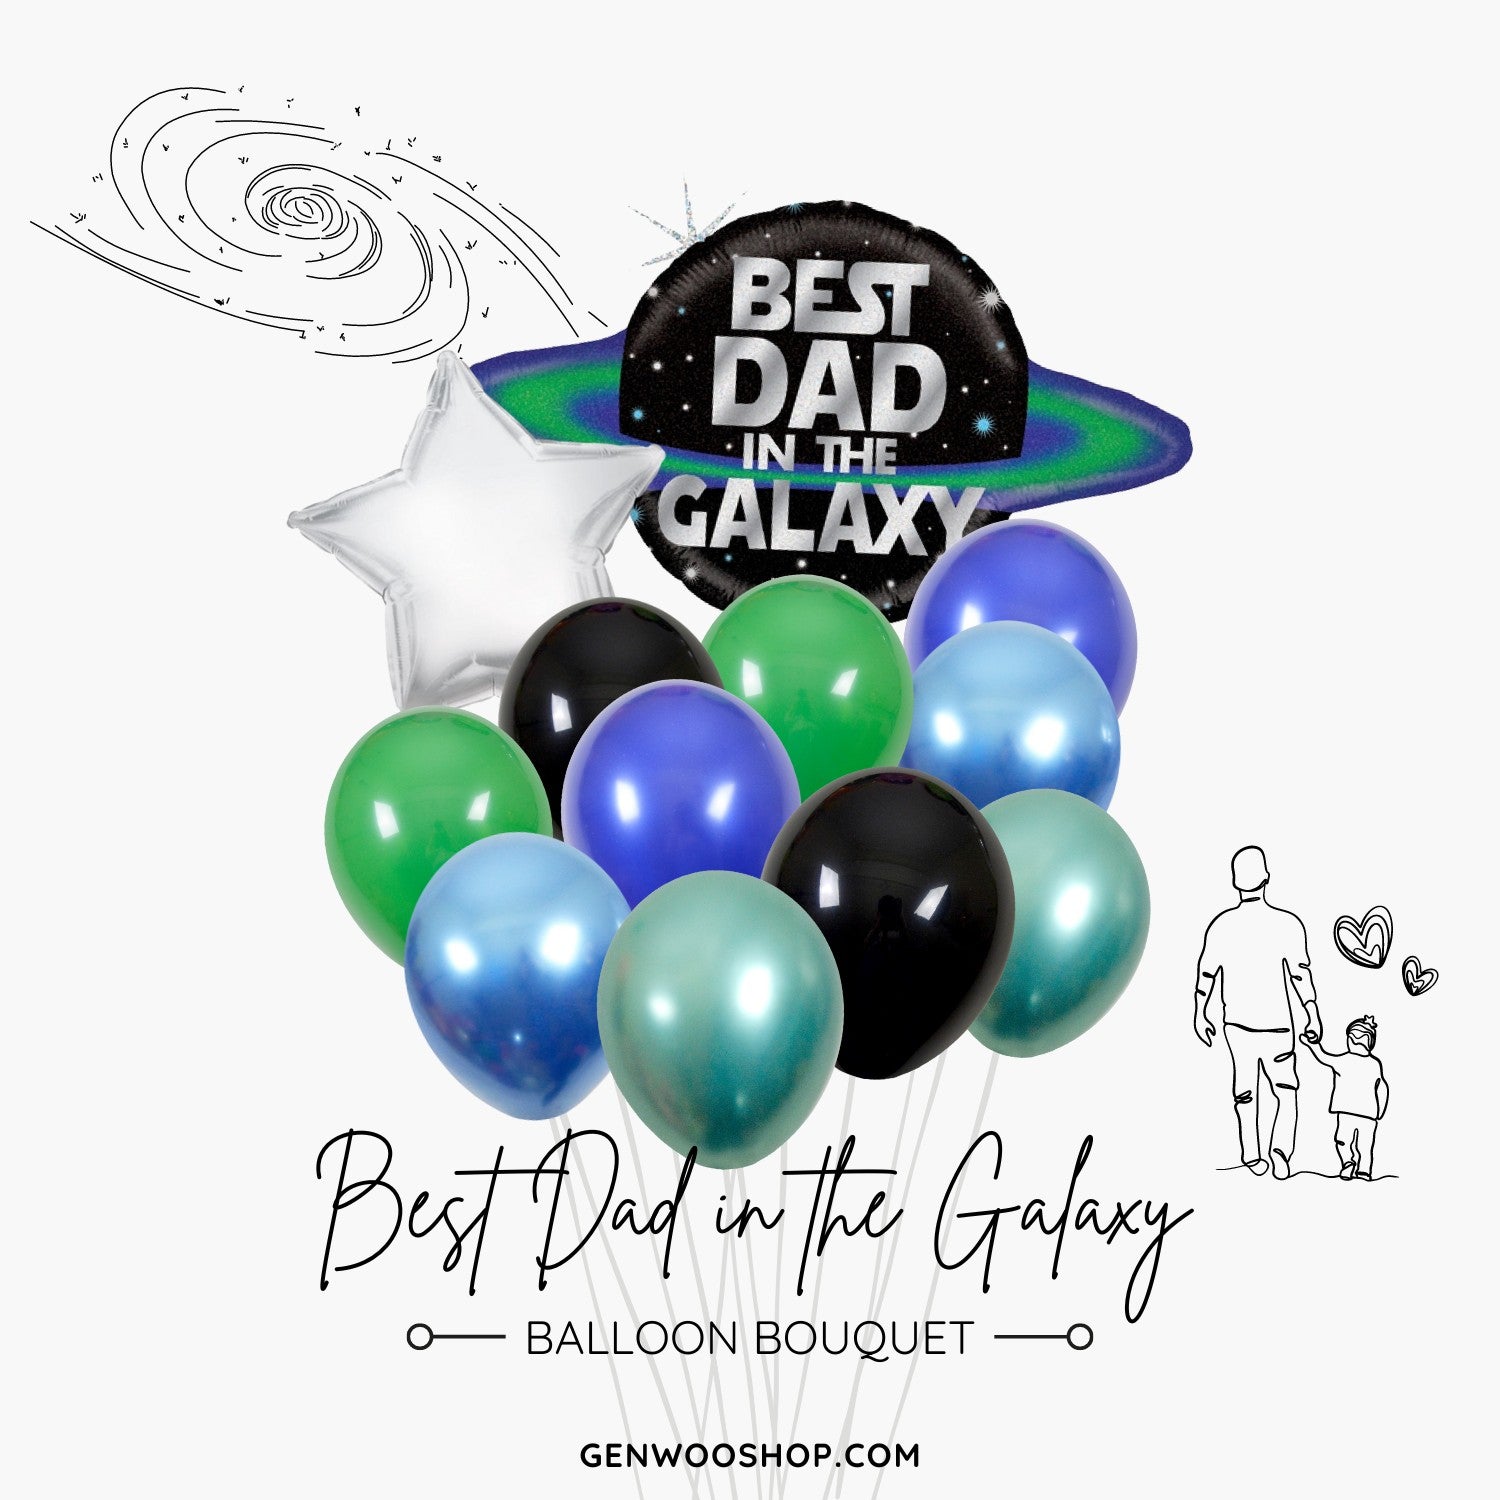 Best Dad in the Galaxy Balloon Bouquet - Happy Father's Day - Ottawa Helium Balloon Services